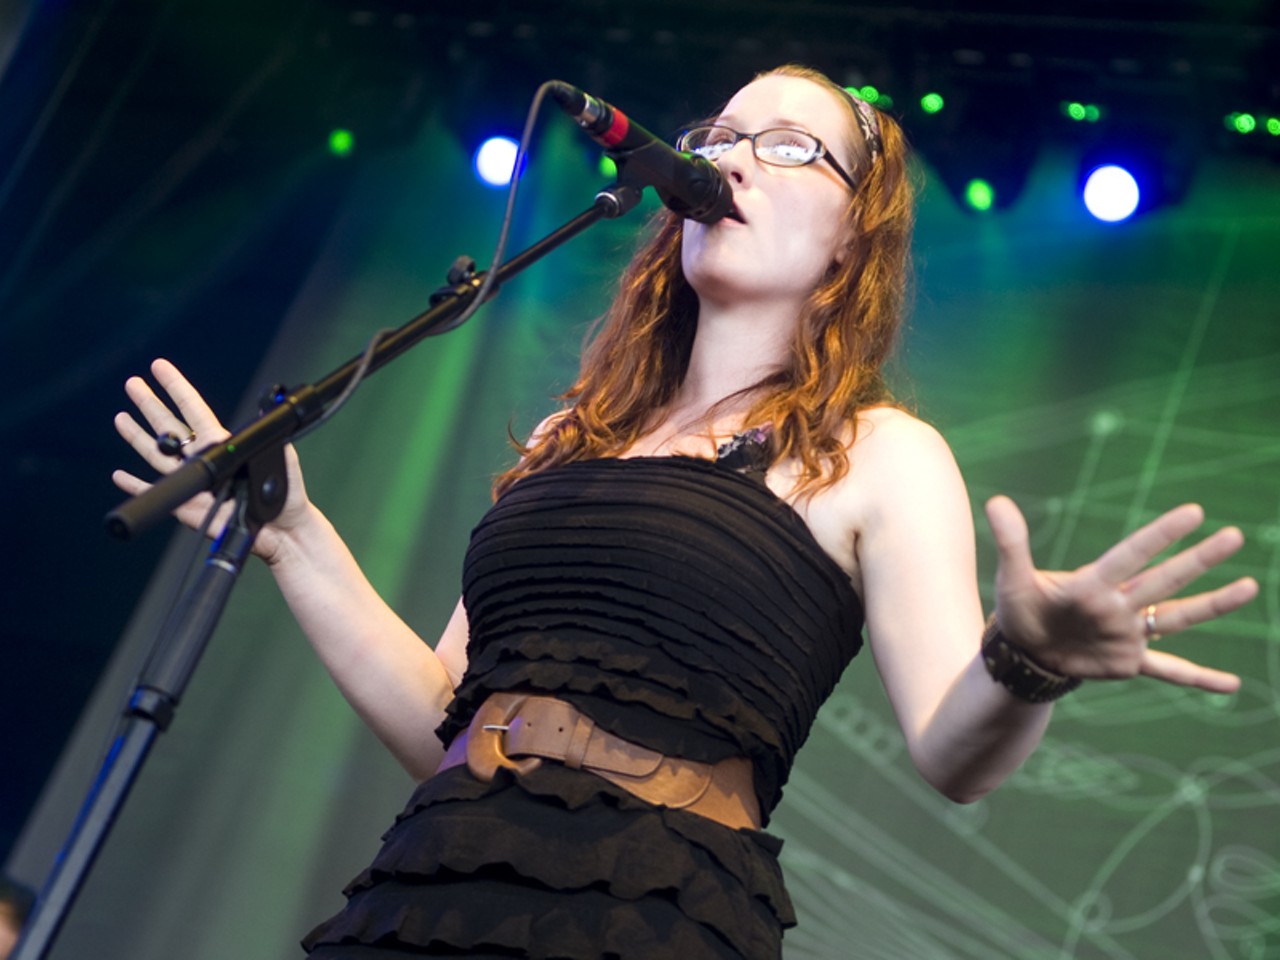 Ingrid Michaelson performing at the Lilith Fair in St. Louis.